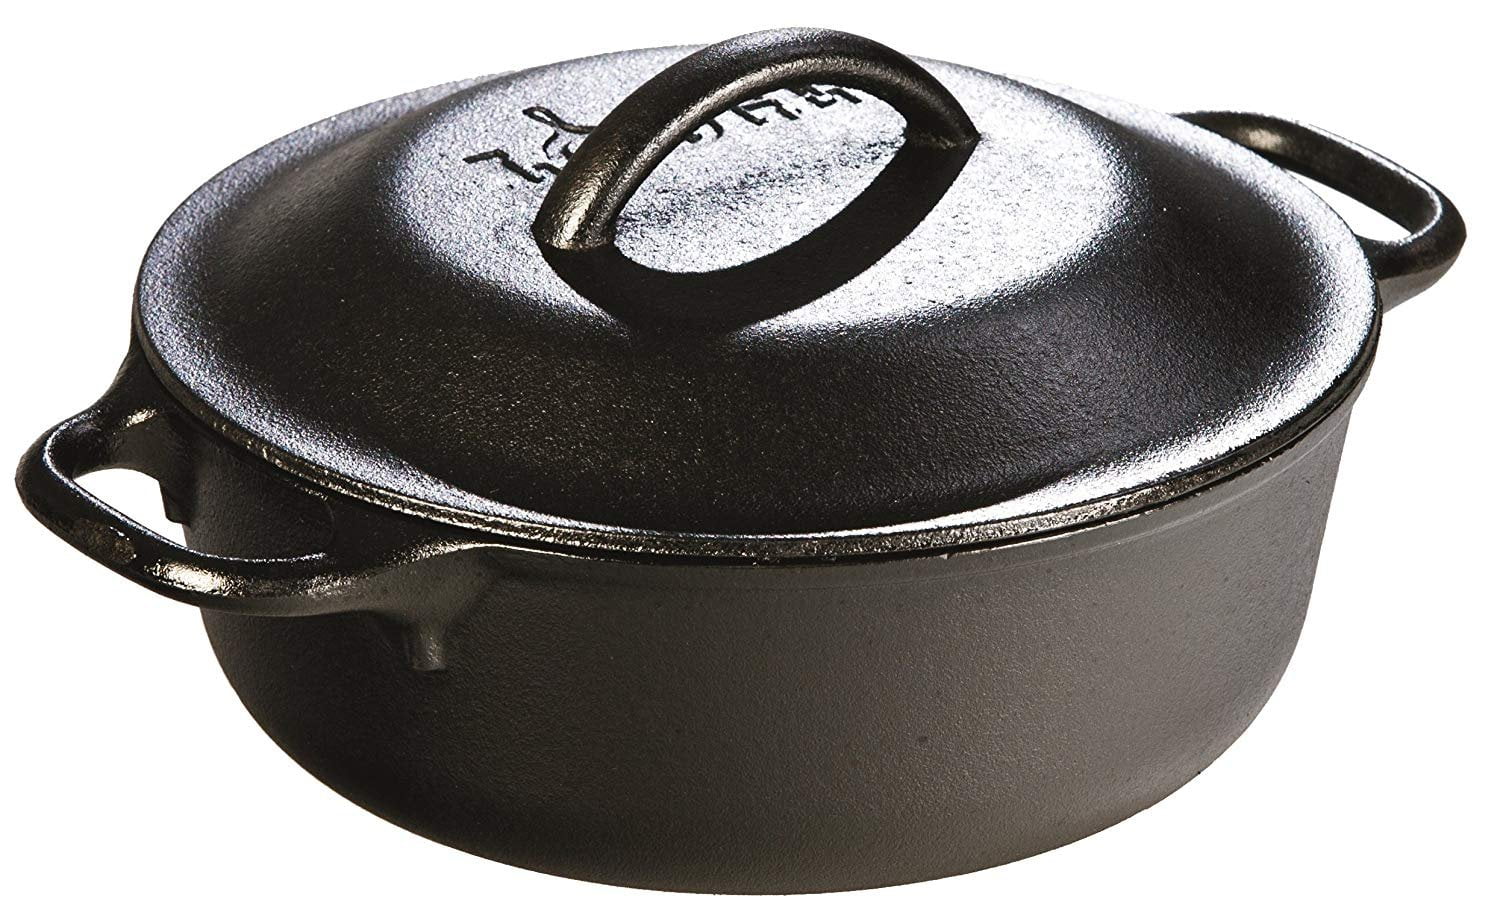 Lodge 2 Quart Cast Iron Dutch Oven. Pre-seasoned Pot with Lid for Cooking,  Basting, or Baking